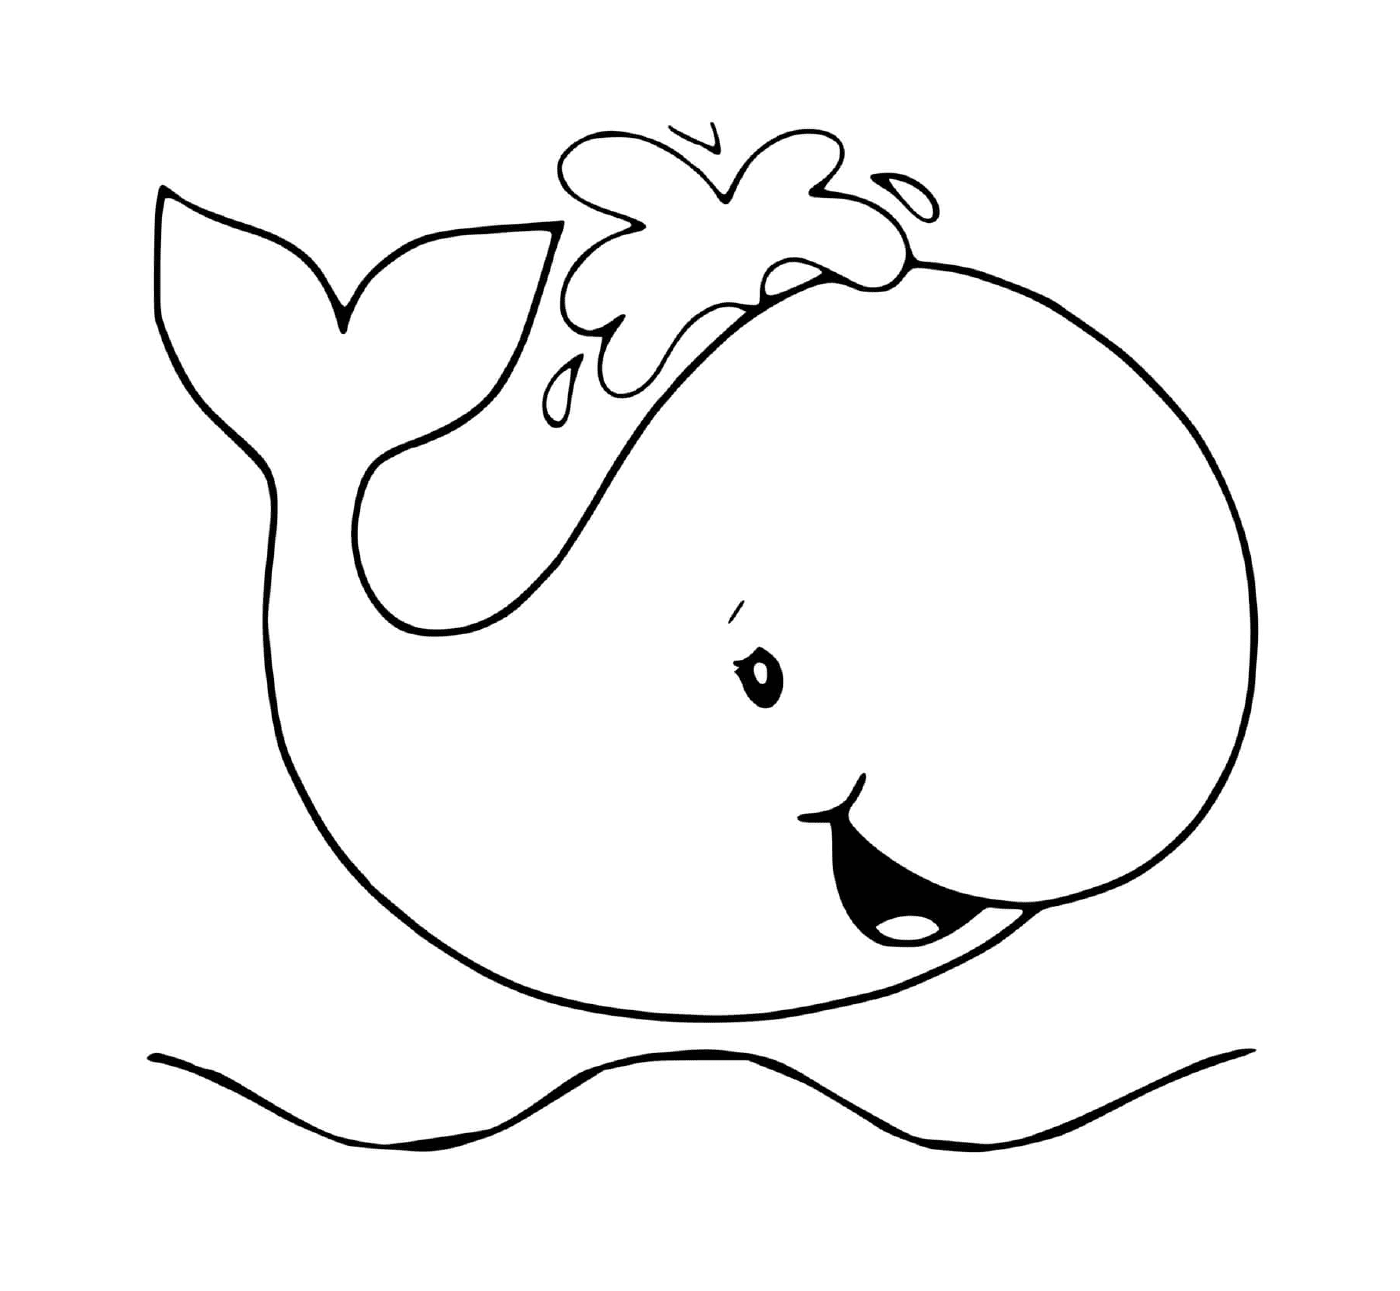  a whale blowing a cloud 